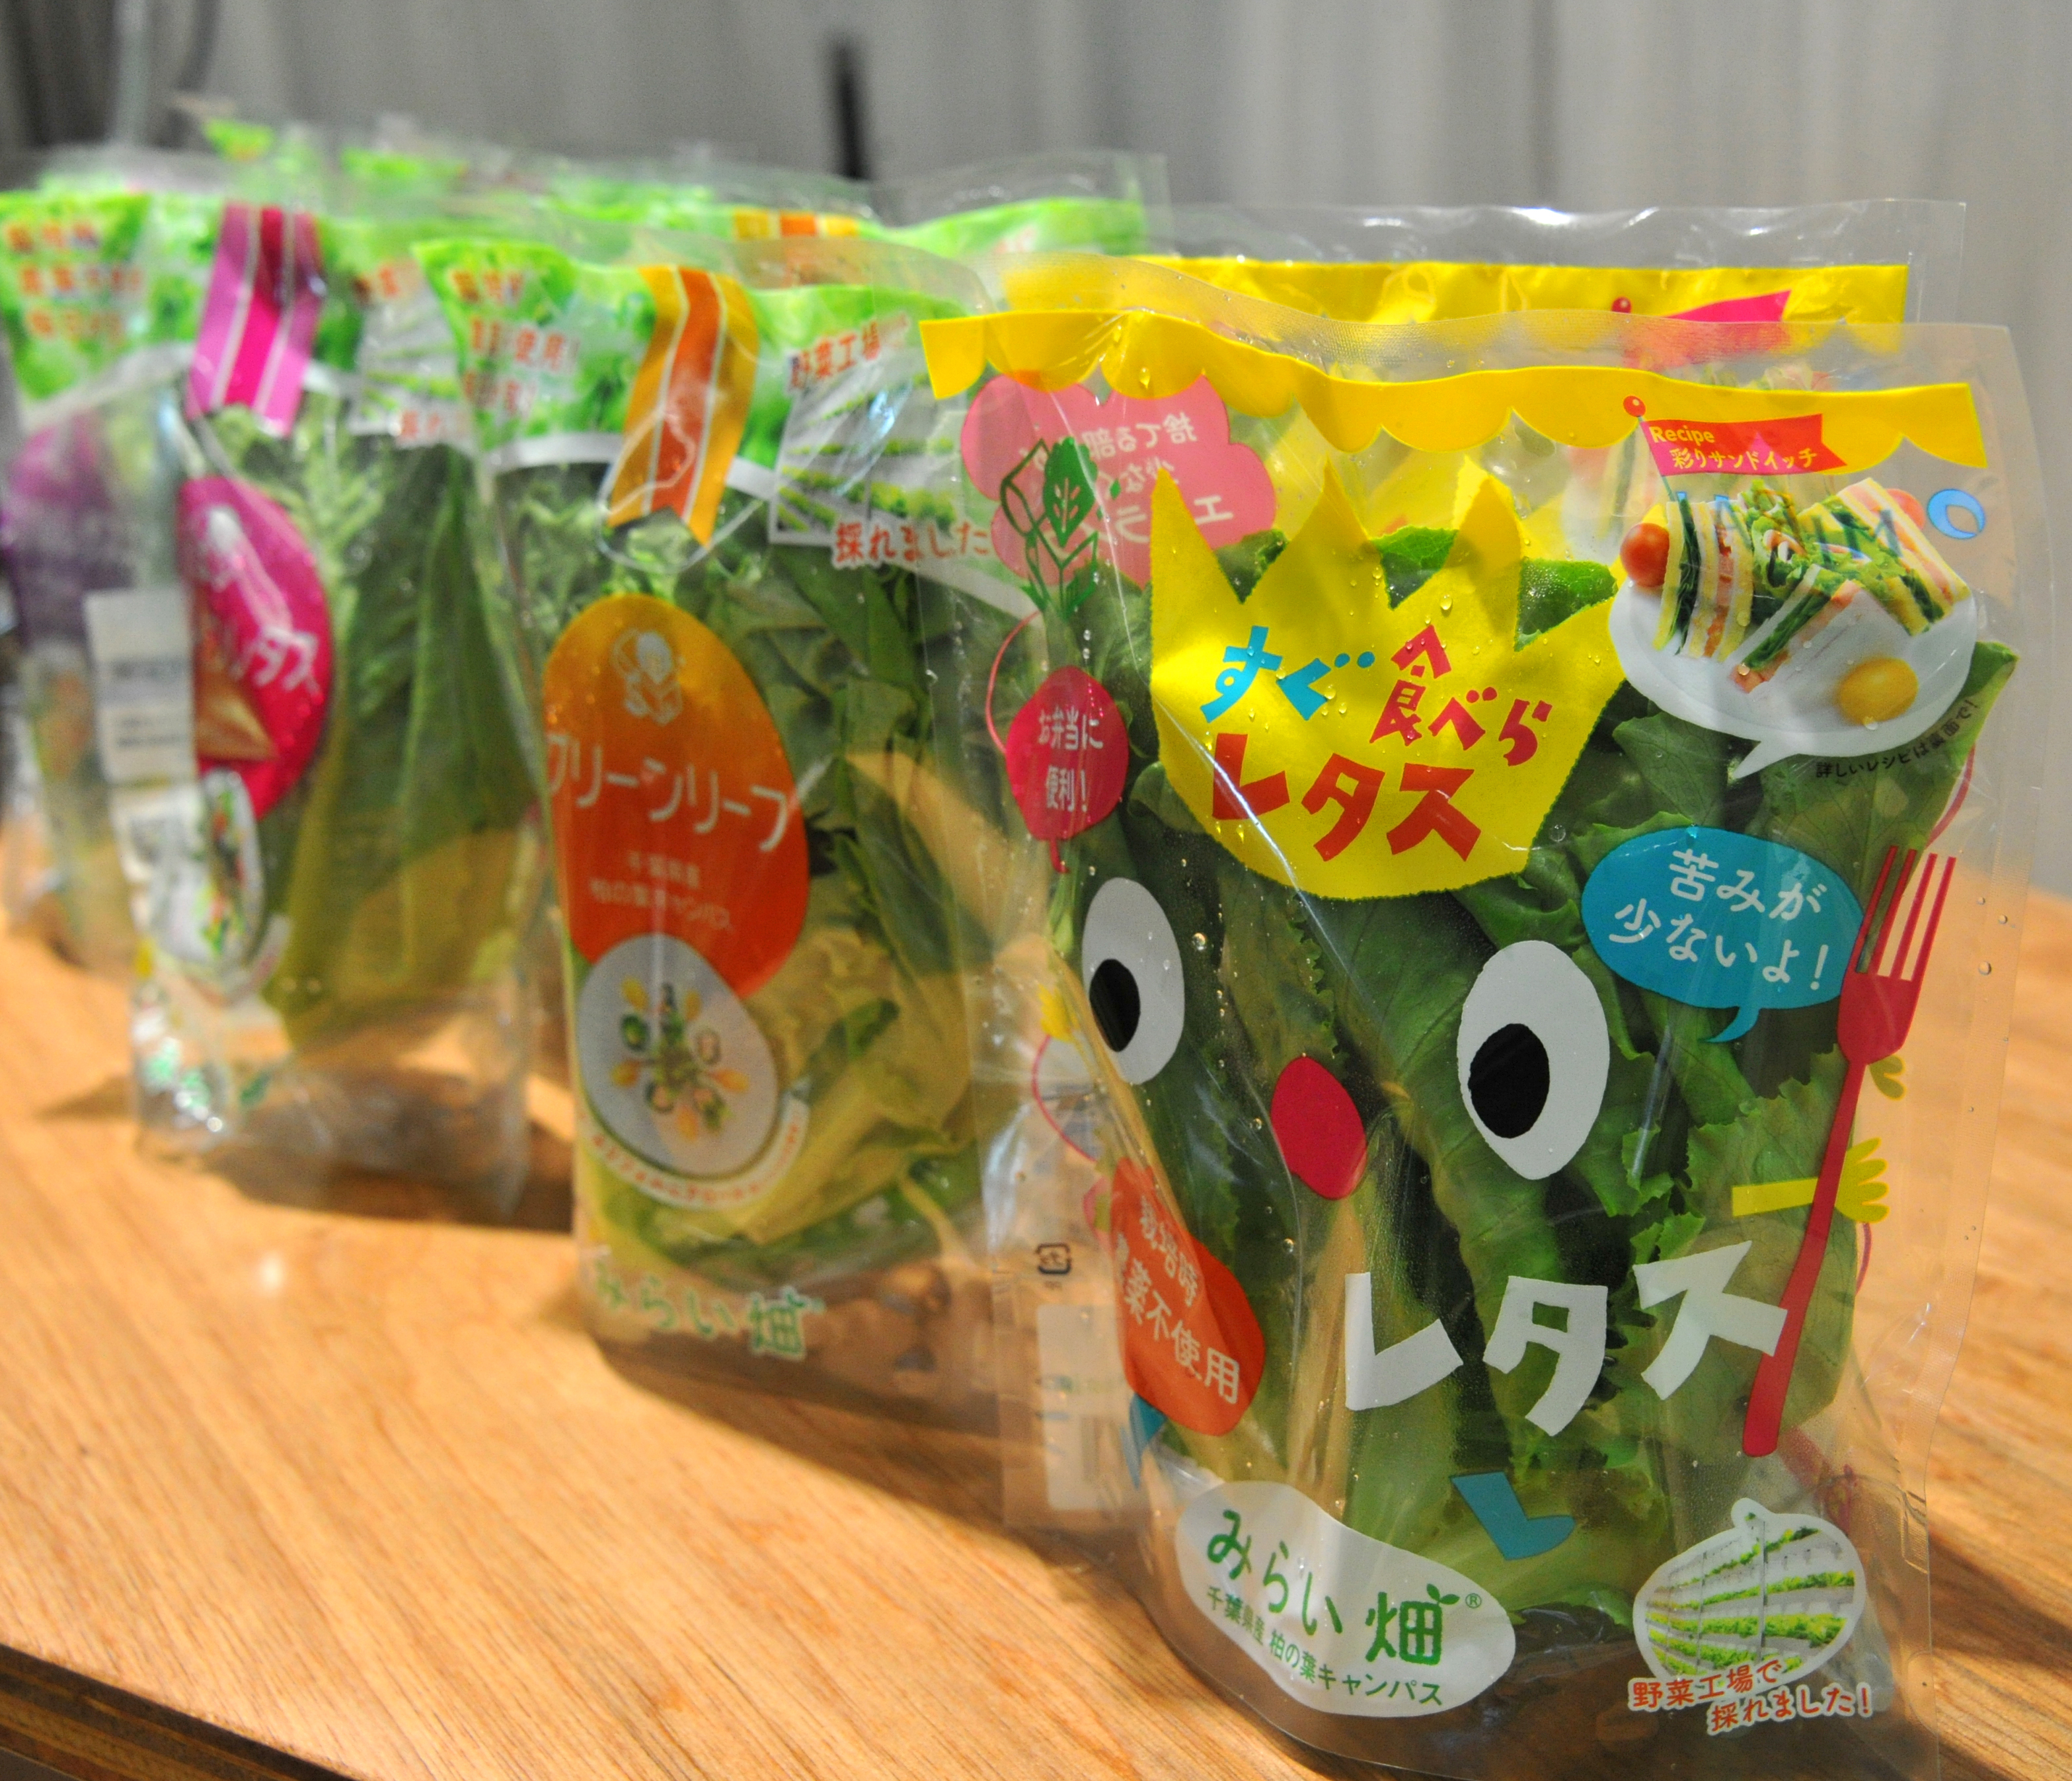 Leafy vegetables that were grown in Mirai Co.'s factory in Kashiwanoha, Chiba Prefecture, are packaged and displayed in June. | YOSHIAKI MIURA